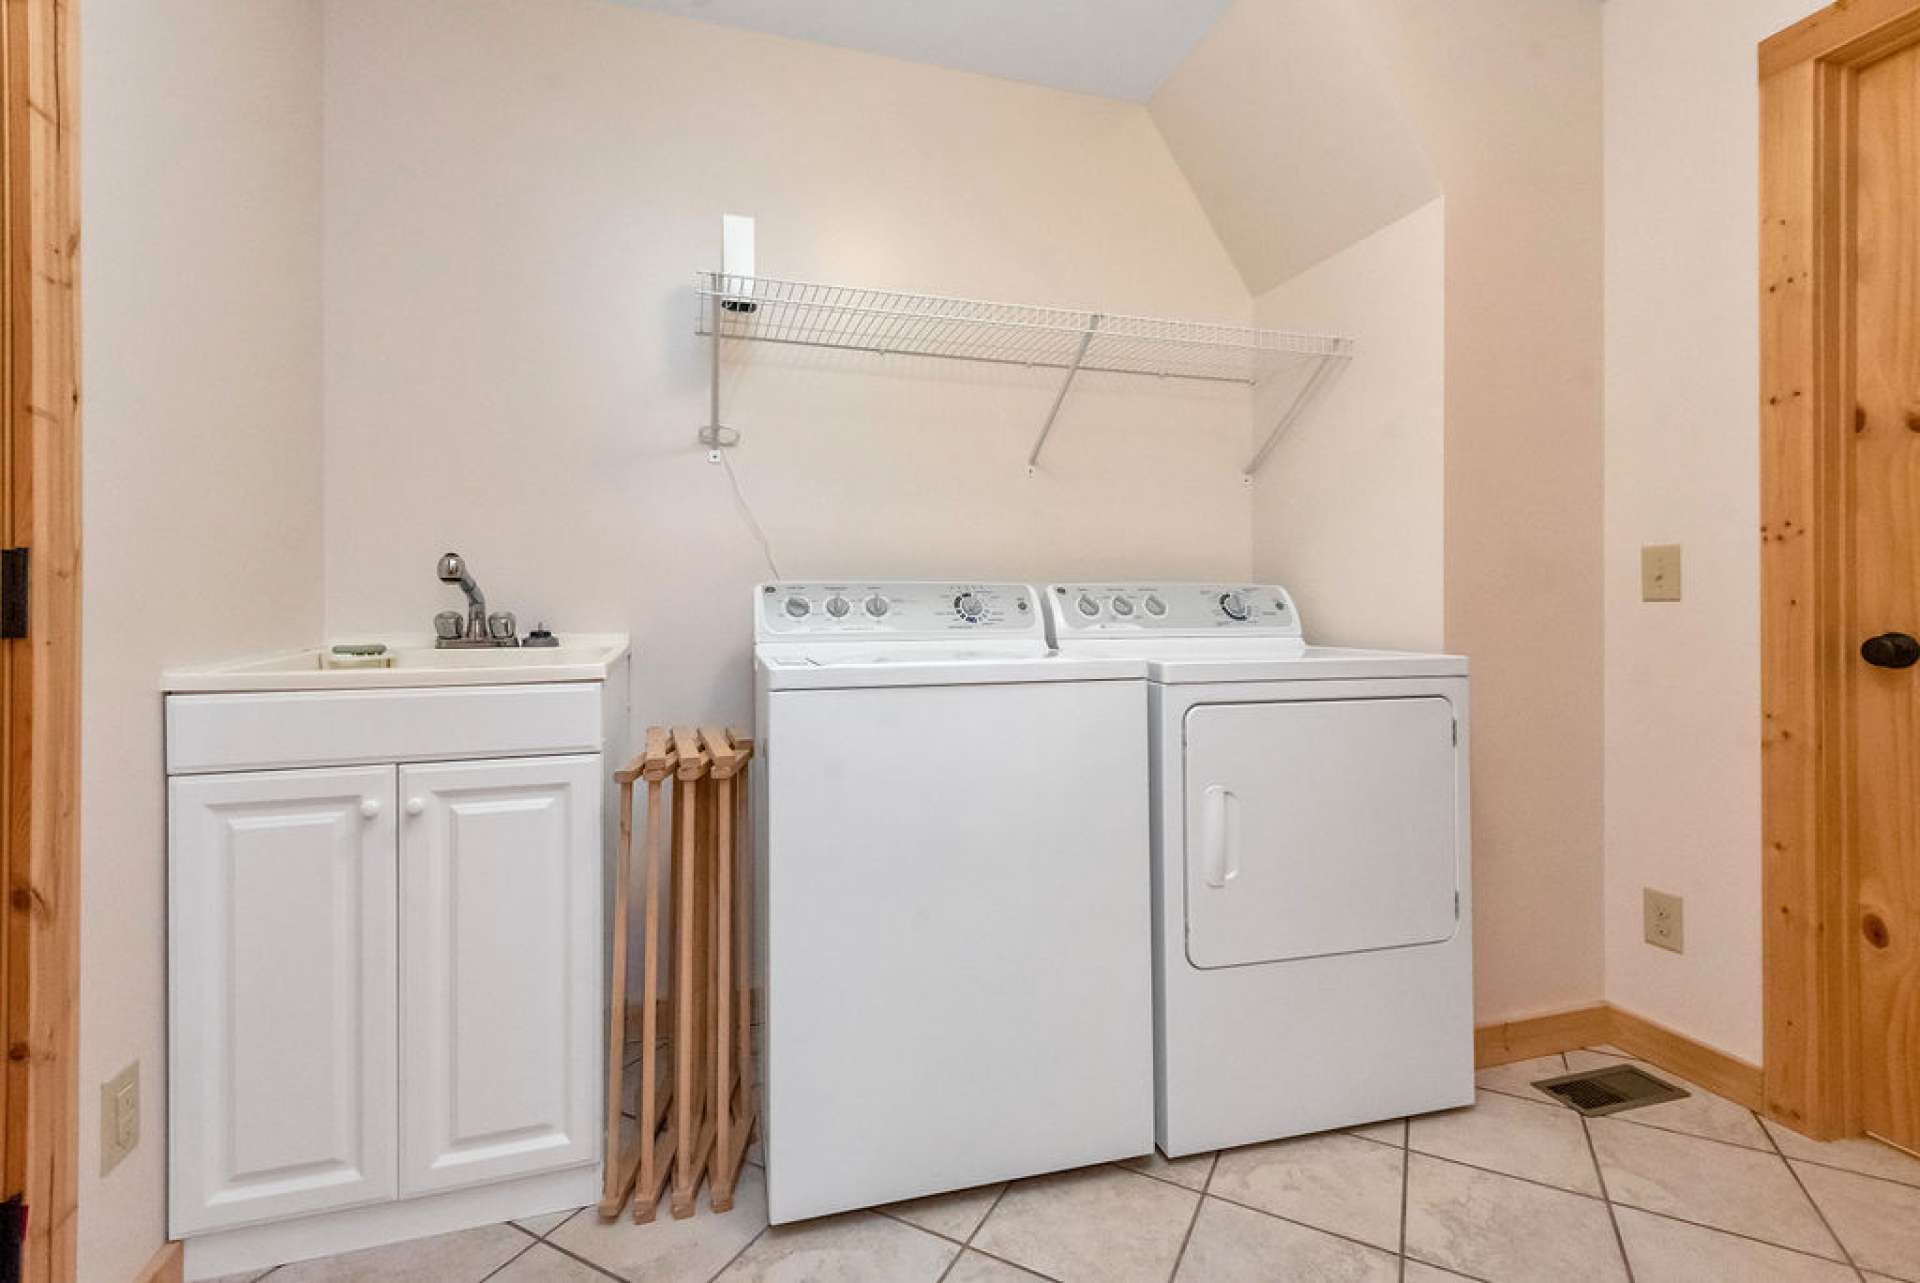 Laundry offers sink, coat closet, and a pantry. There is access to the back deck from here, as well.